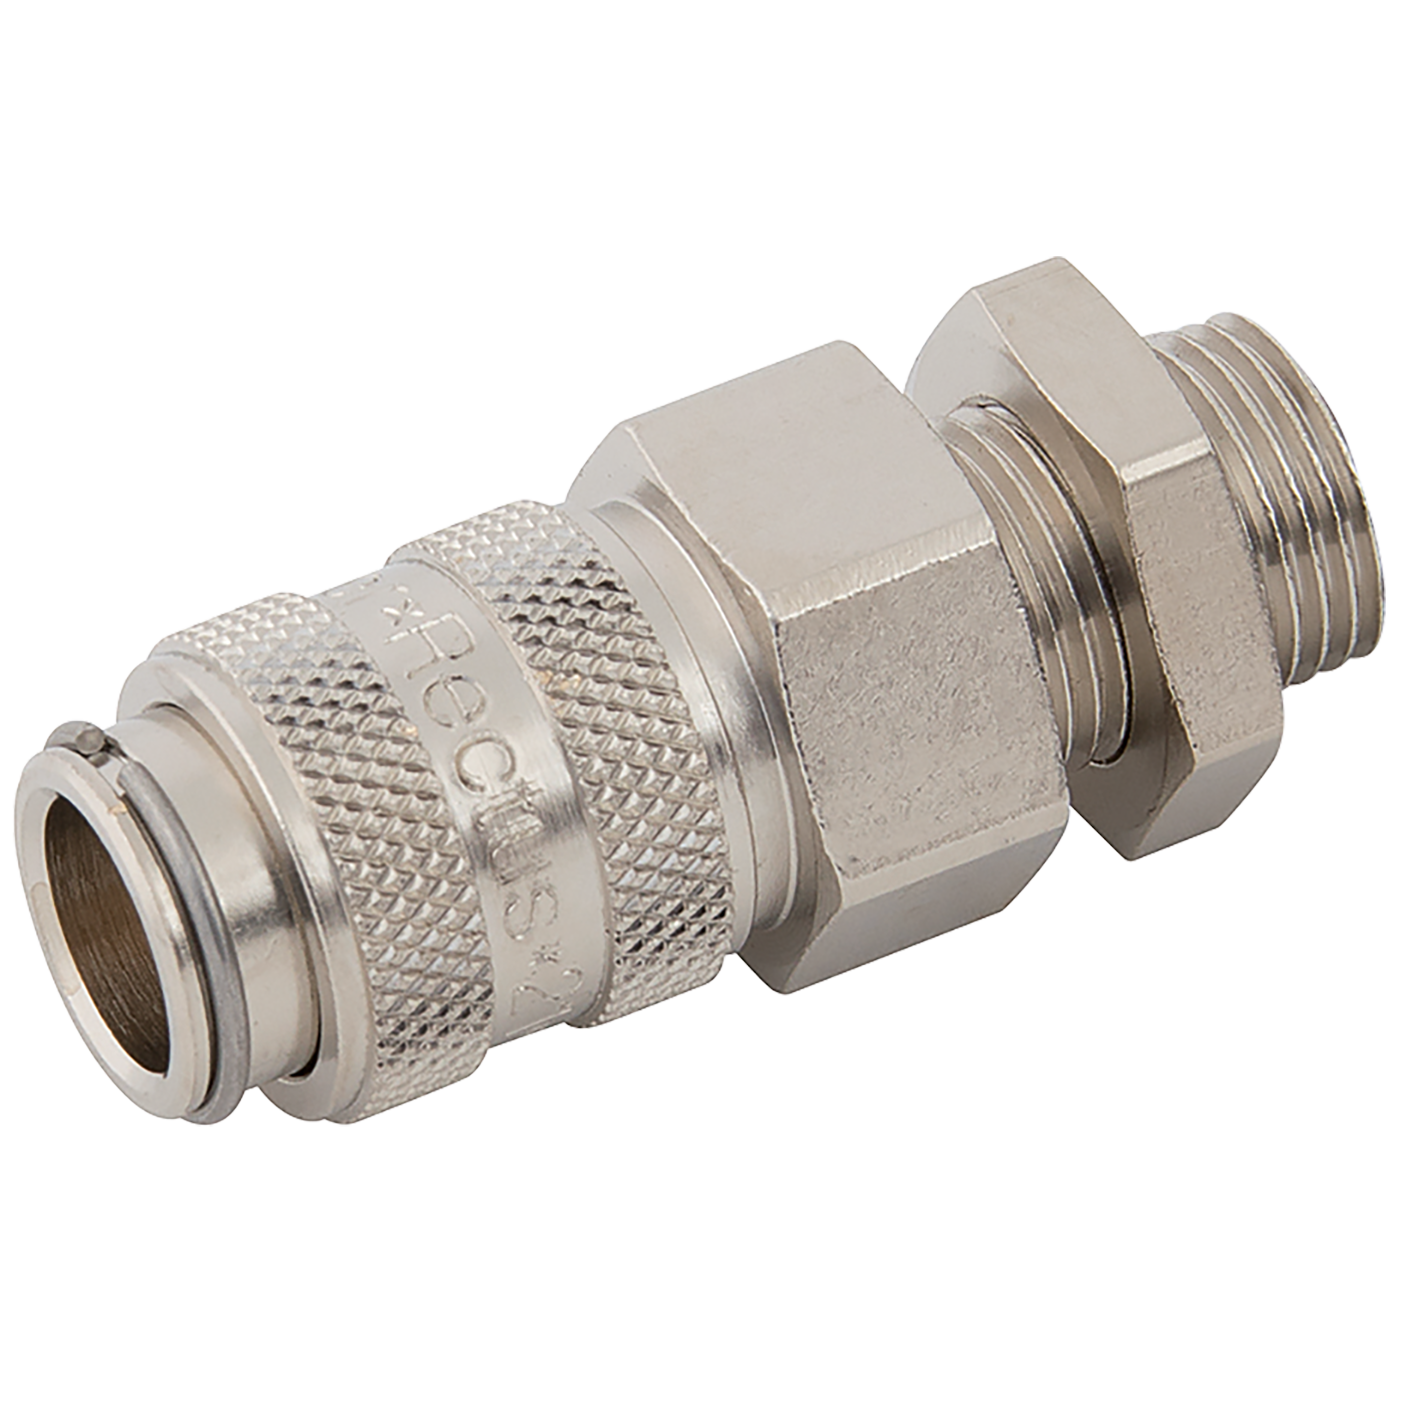 1/8" BSPP Male Coupling